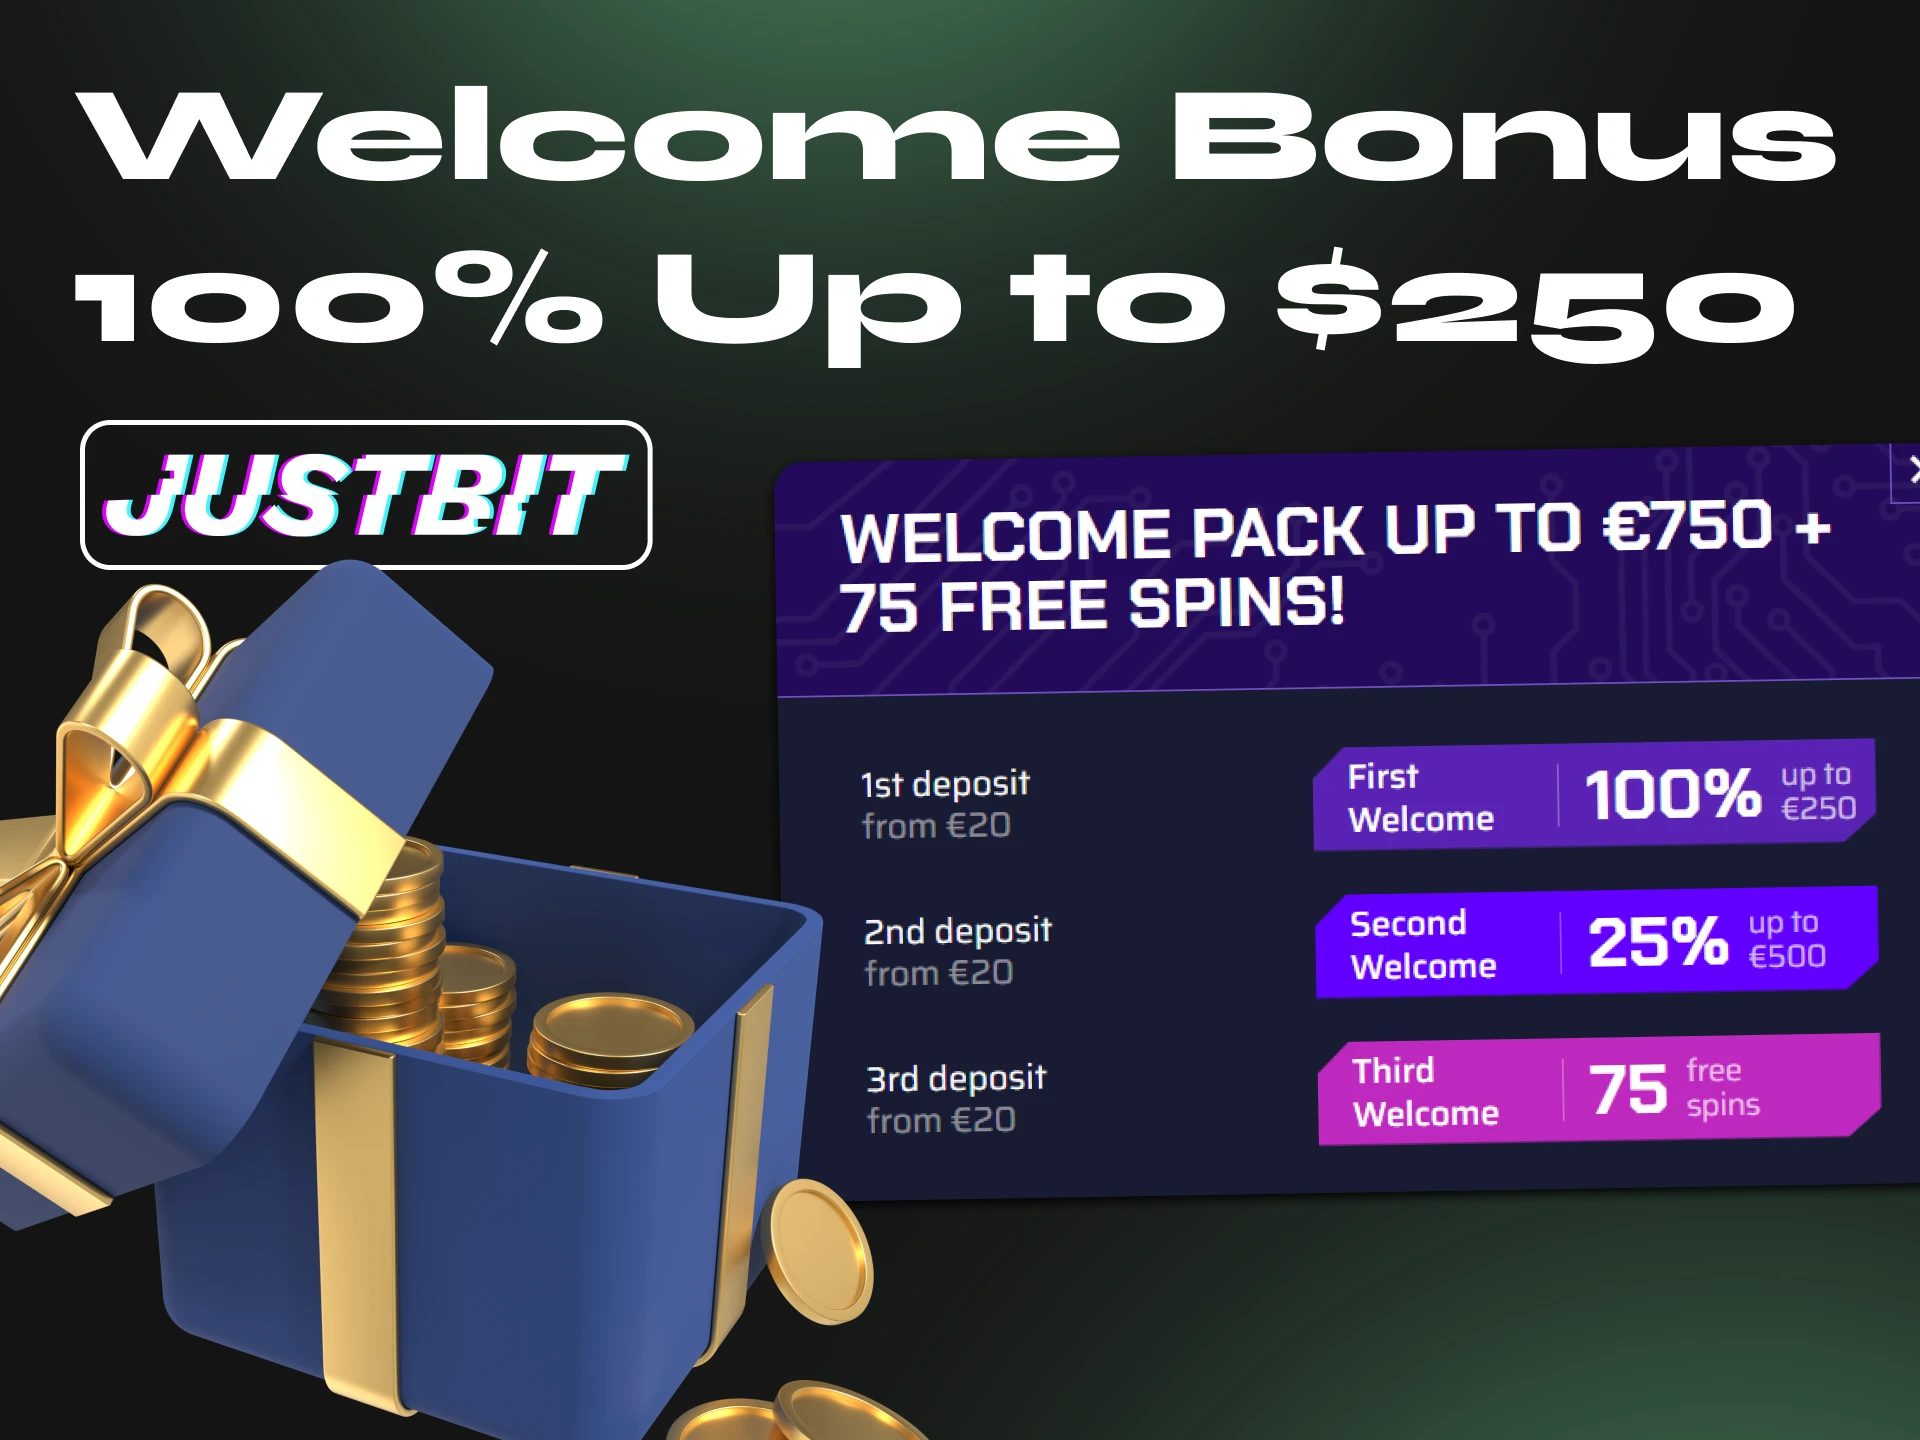 At Justbit Casino, get your welcome bonus and start betting on poker.